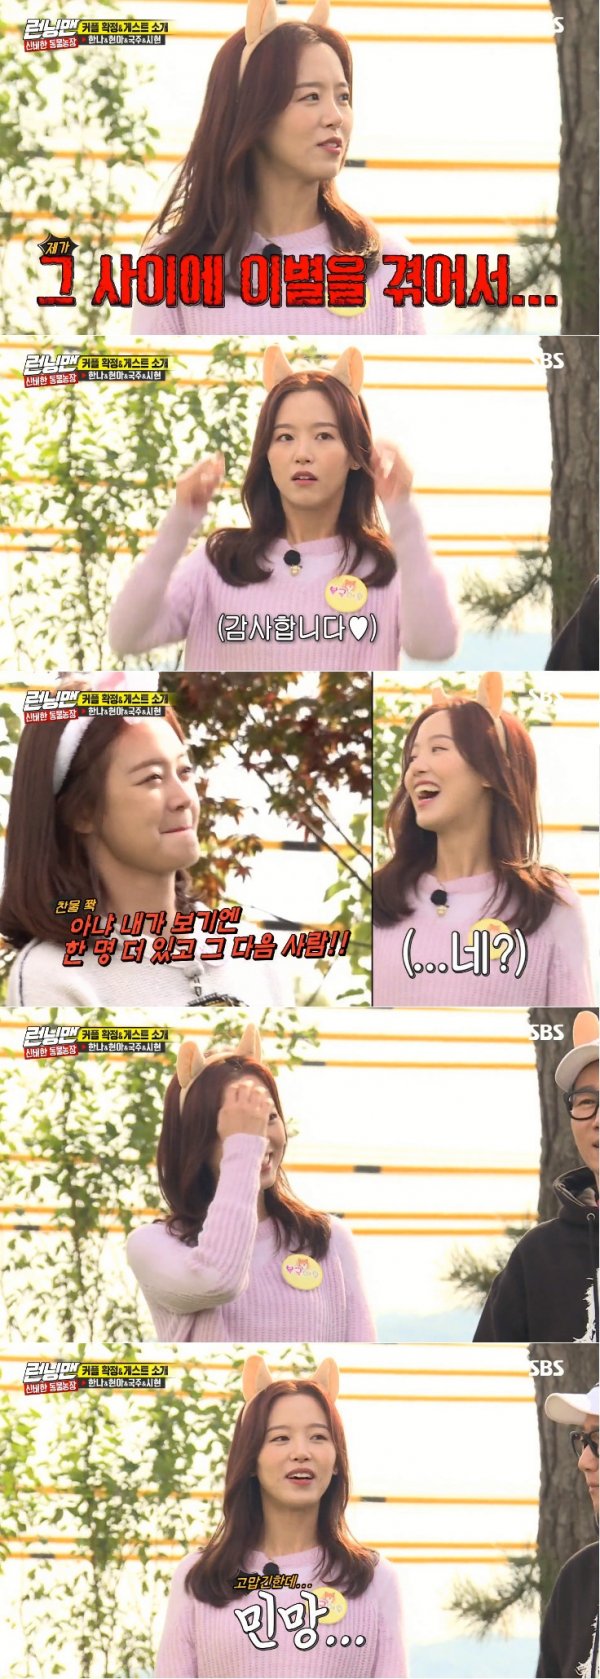 Running Man Kang Han-Na Confessions his BreakupIn the SBS entertainment program Running Man broadcasted on the afternoon of the 10th, actor Kang Han-Na was recently shown to be a contestant that he had recently suffered breakup.Kang Han-Na said, I went through breakup after coming out last year.When you do this, you have to stick together, Yoo Jae-Suk said.Kang Han-Na also said, Ive been through breakup for a while. Im fine. Ive already won. Its not hurting. Its too healthy.